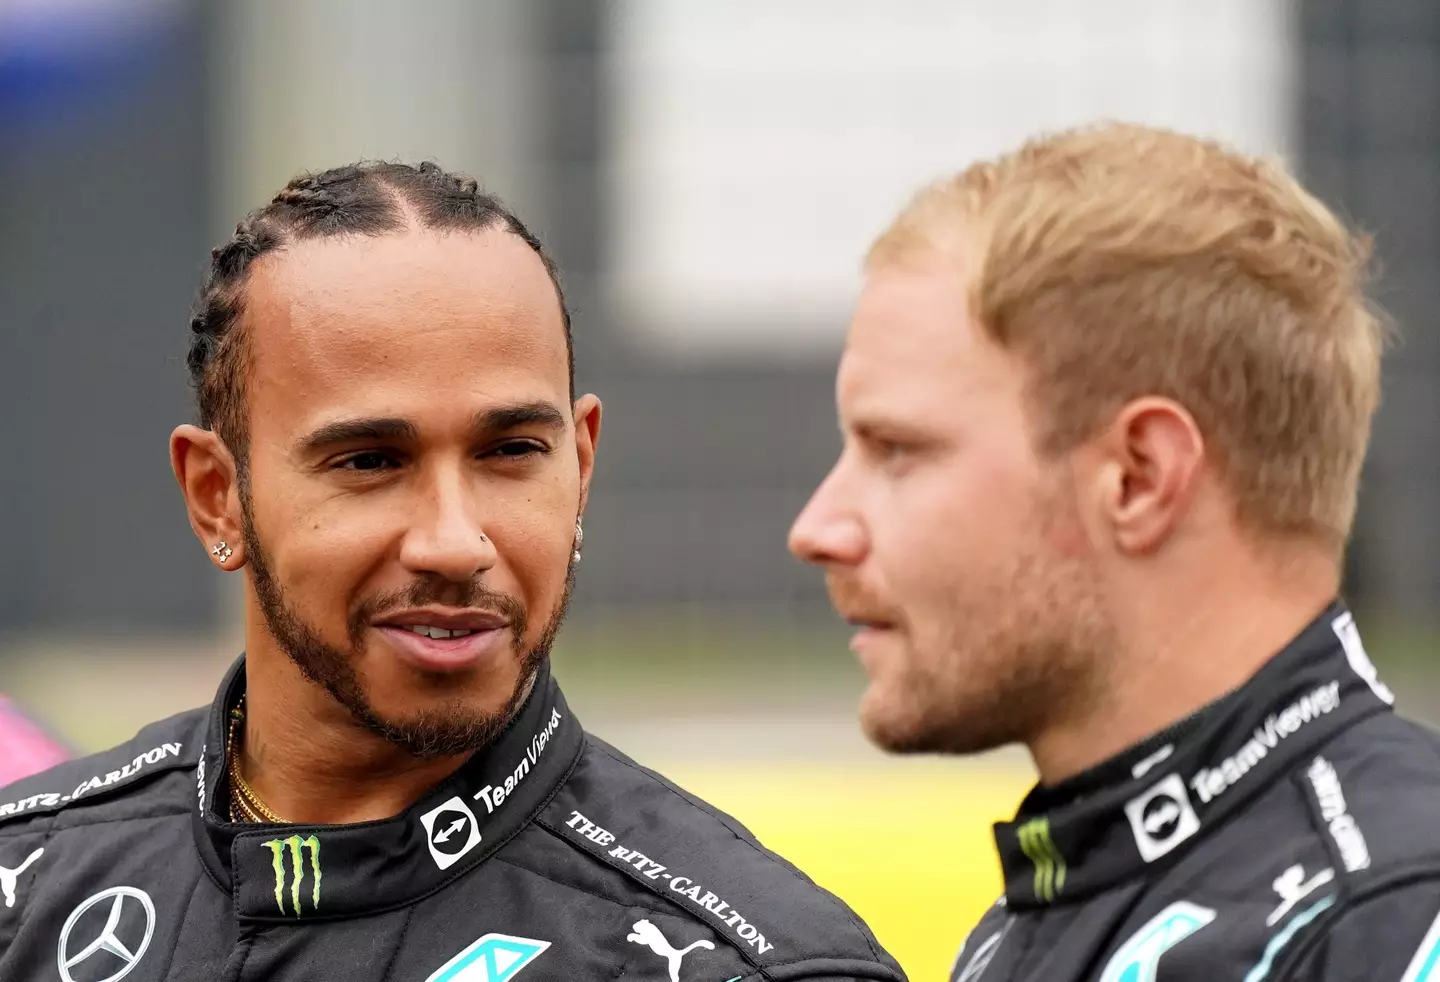 Bottas played second fiddle to Hamilton at Mercedes. Image: Alamy